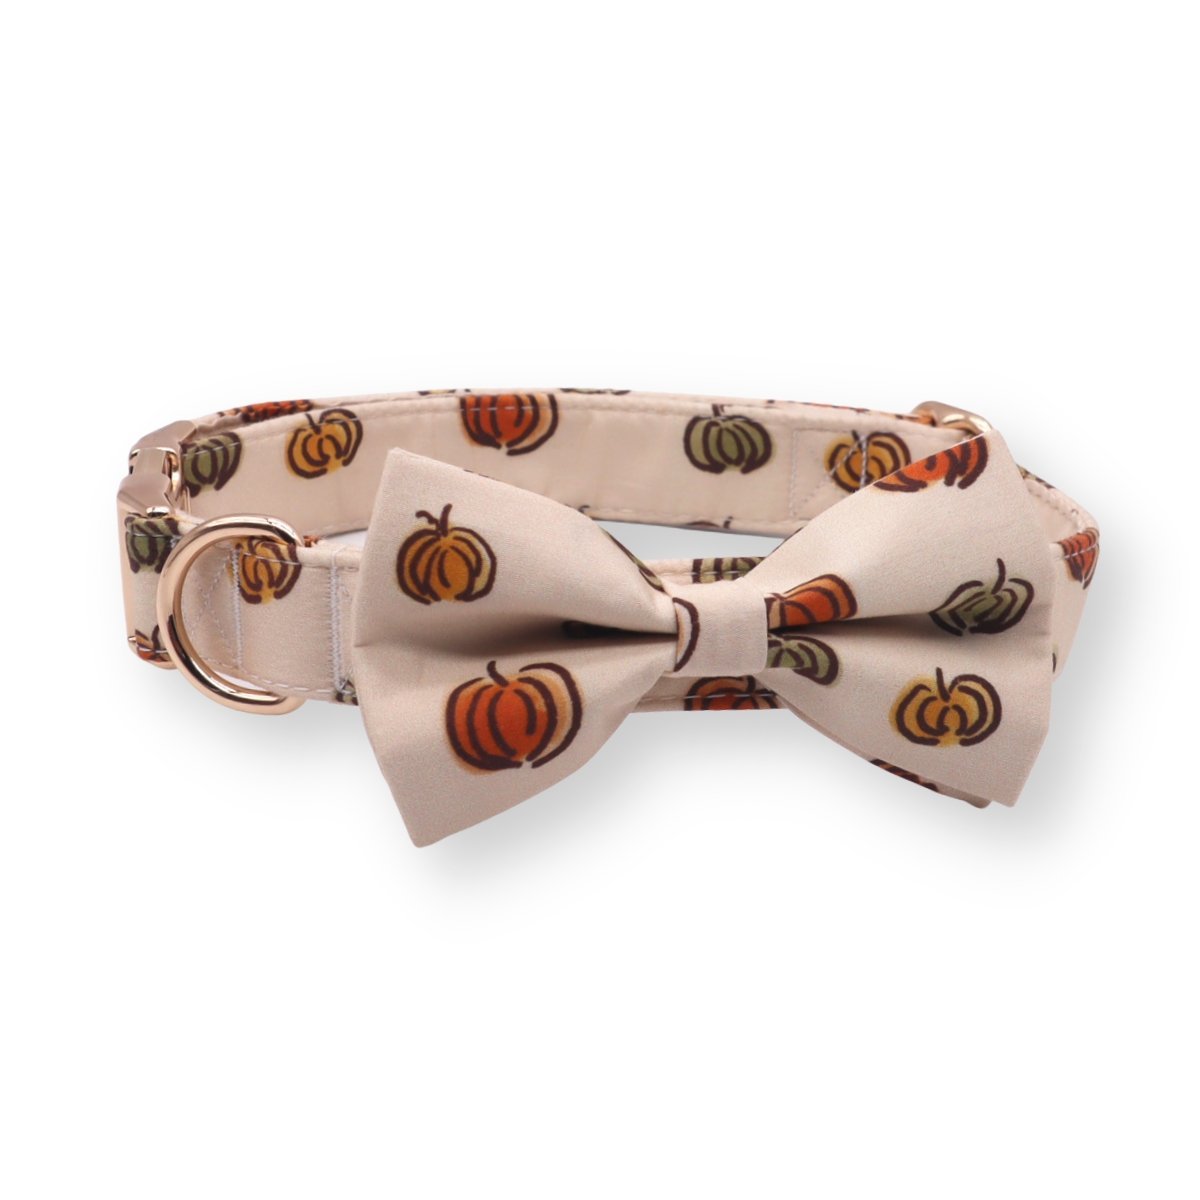 luxury dog collars with bow for girls and boys - customized dog bow tie collars - Pumpkin pattern collars for dogs